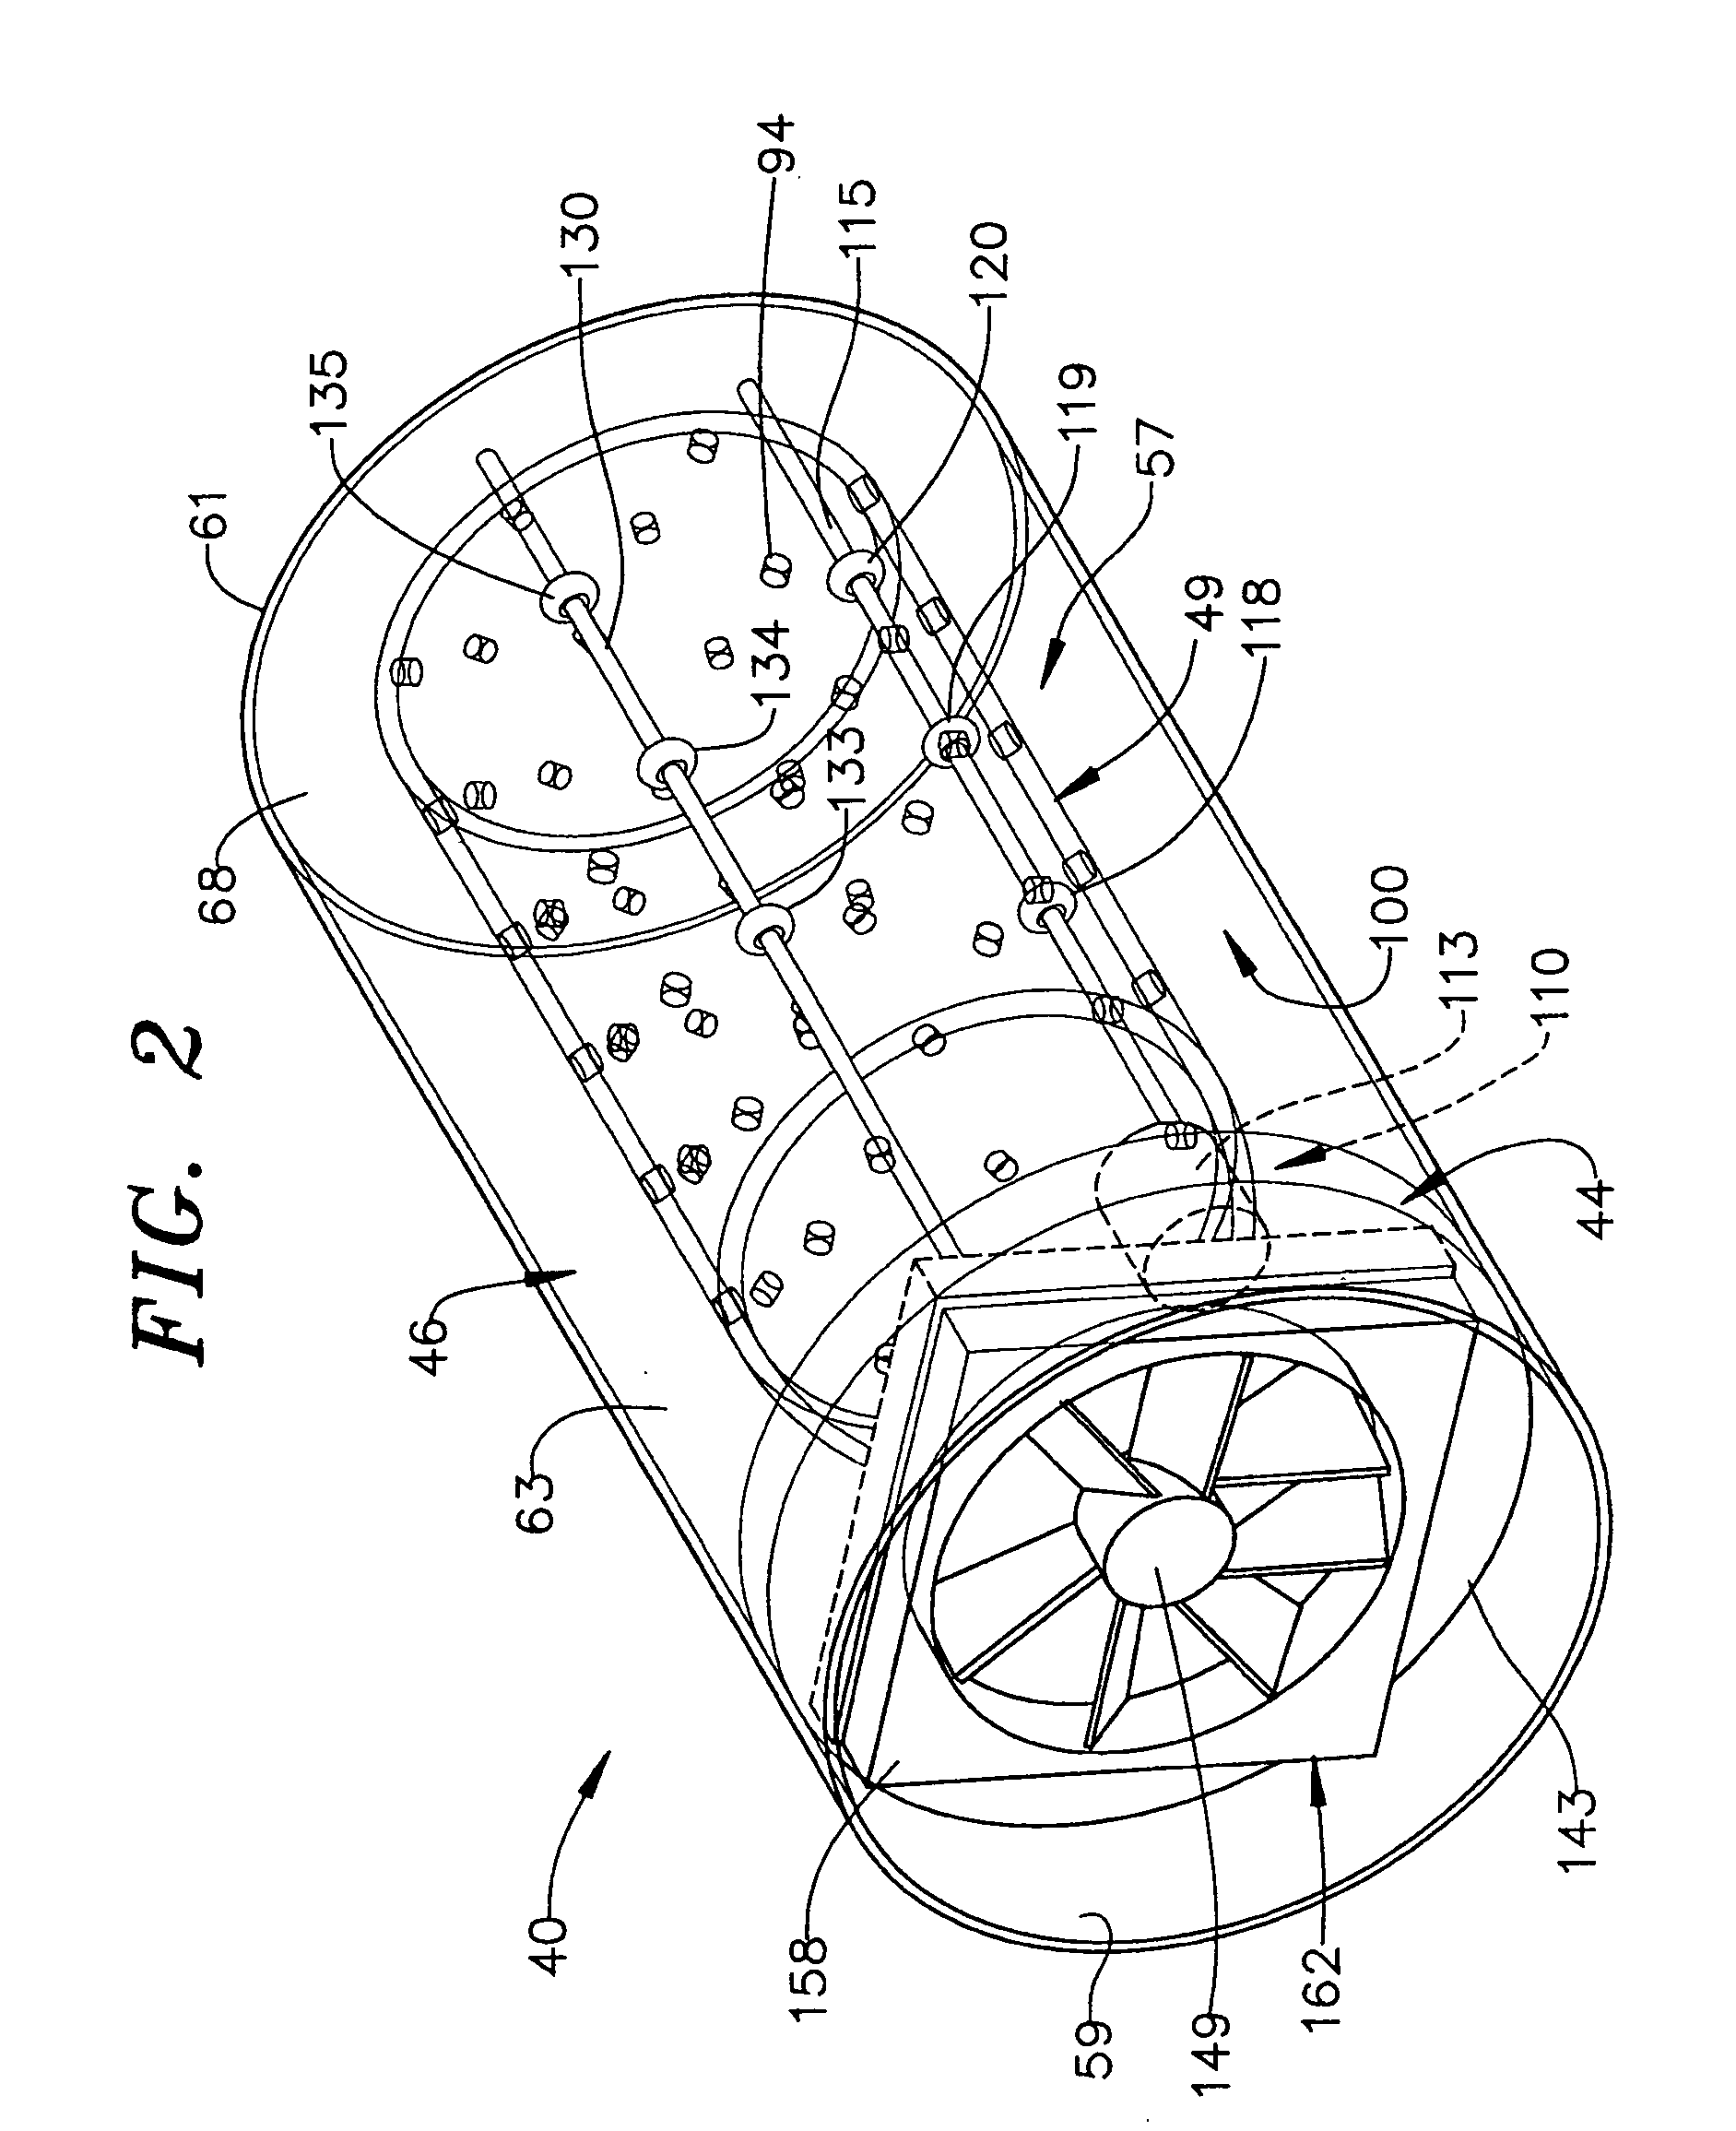 Device for rapidly chilling articles in a refrigerator